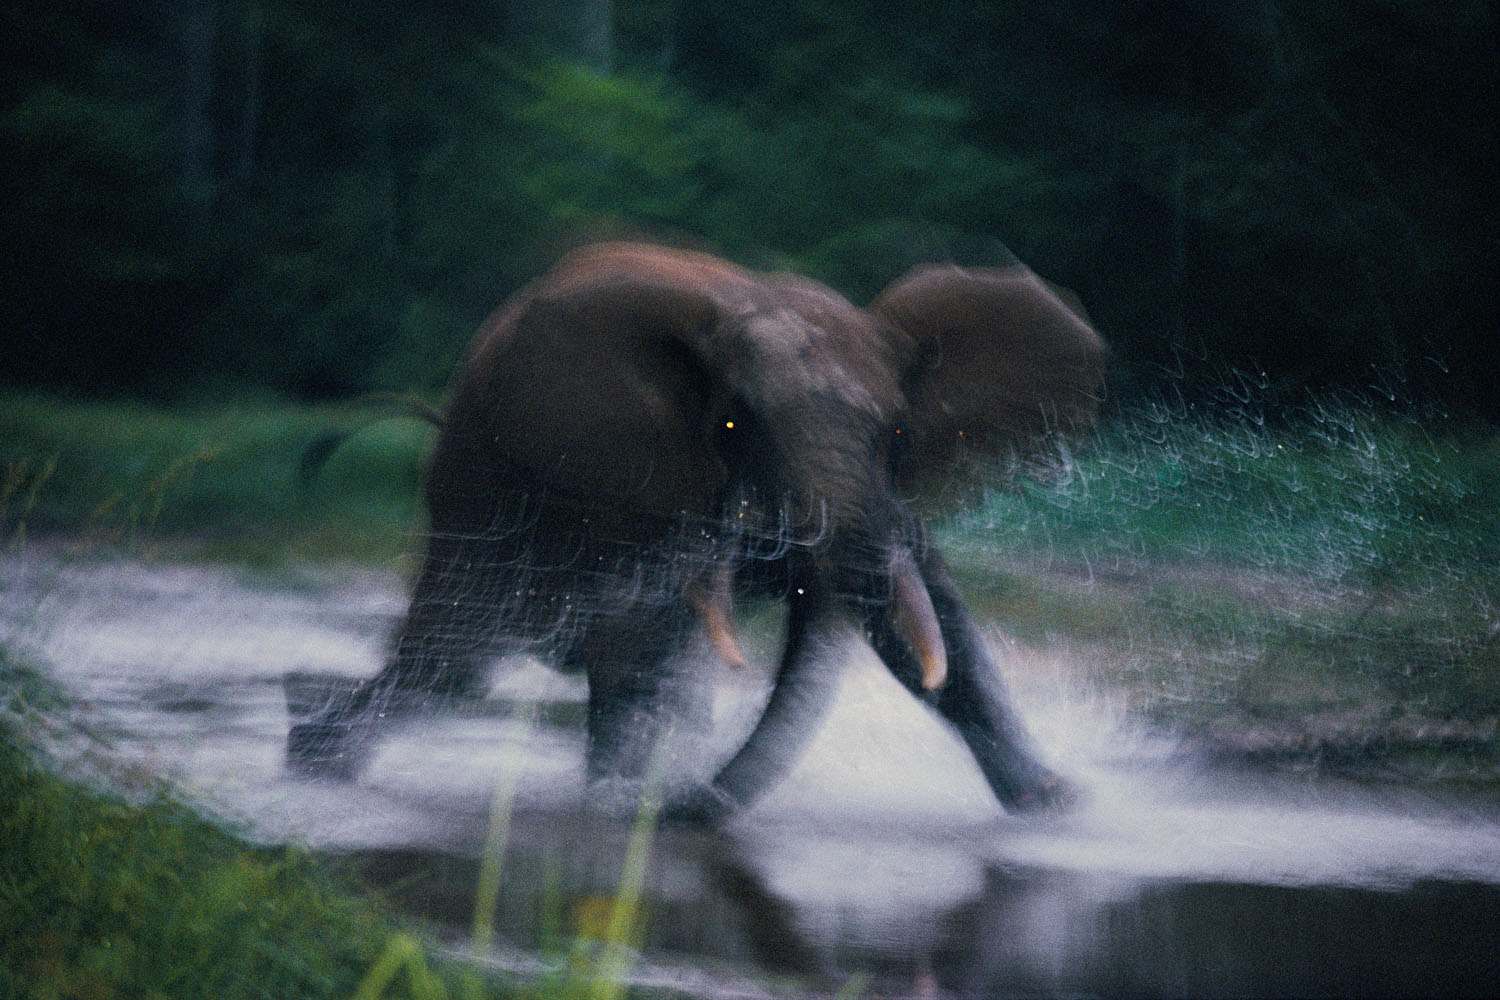 Image Number: 491887Title: Charging ElephantLocation and Date: Near Dzanga Bai, Central African Republic, 1993Caption: Knowing that elephants liked to feed at night in the small creek near Andrea Turkalo’s camp, I would slip out just before dawn to have a look. I made this image just as I started to run.NGM 07/1995: Taking charge, a forest elephant guards her ground at Dzanga Bai. Attracted by salt-rich soil, most elephants arrive in a group consisting of an adult female and her offspring (males leave the family upon reaching sexual maturity). They peacefully share Dzanga with bongo, sitatungas, and forest buffalo--but if threatened by humans, females will charge. "Males," observes biologist Andrea Turkalo, "prefer to flee rather than risk confrontation" (cover, page 22-3). Exhibit Caption: All forest elephants fear humans and this elephant charged in response to the photographer's scent.